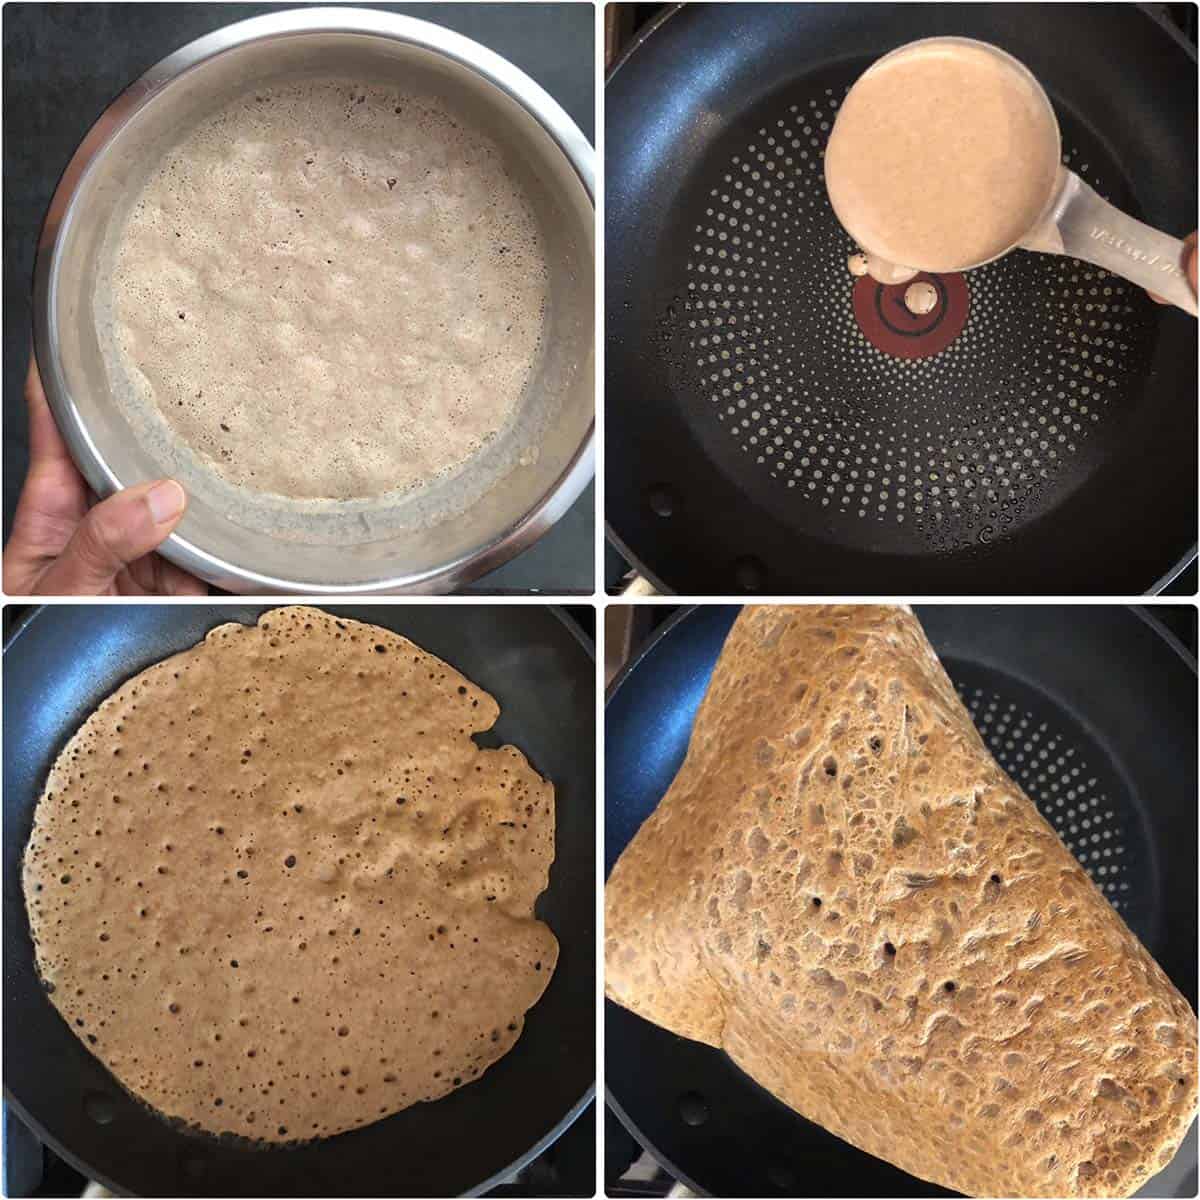 4 panel photo showing the making of Quick Injera in a nonstick pan.